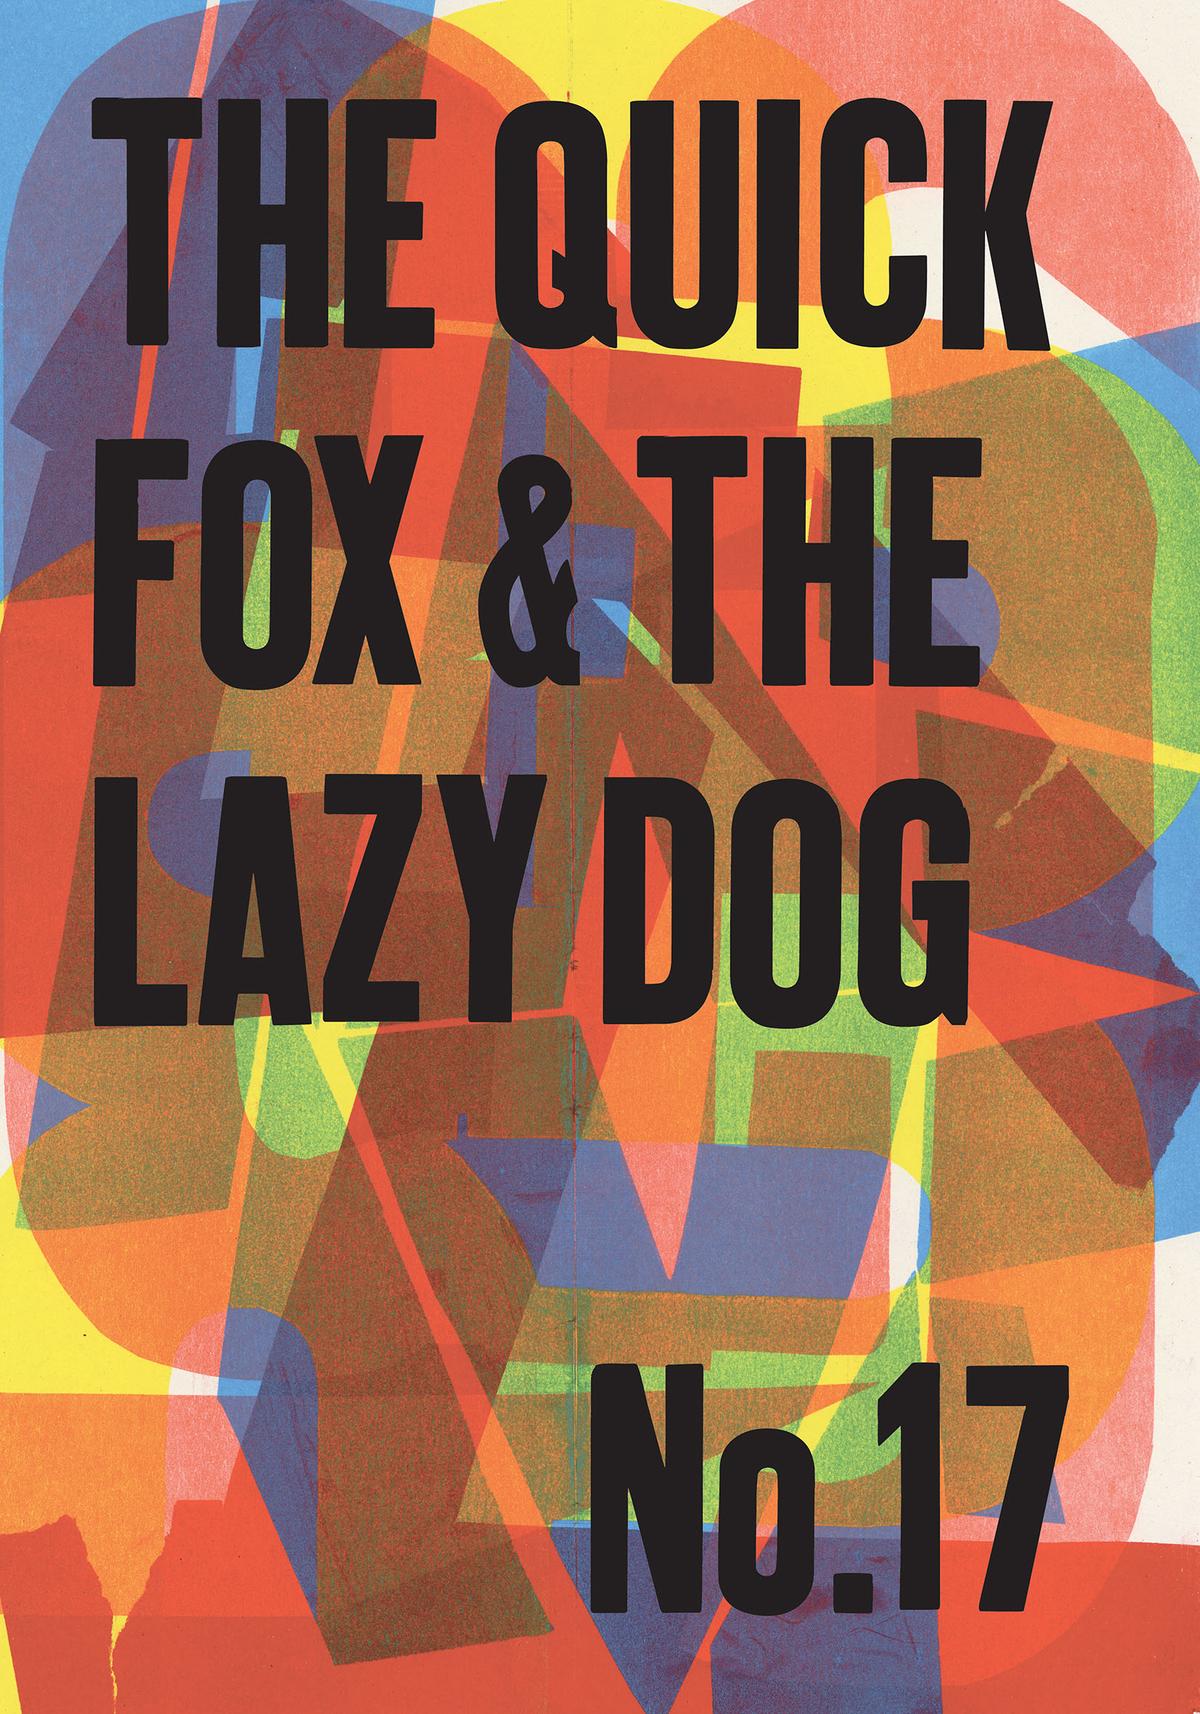 The Quick Fox & The Lazy Dog